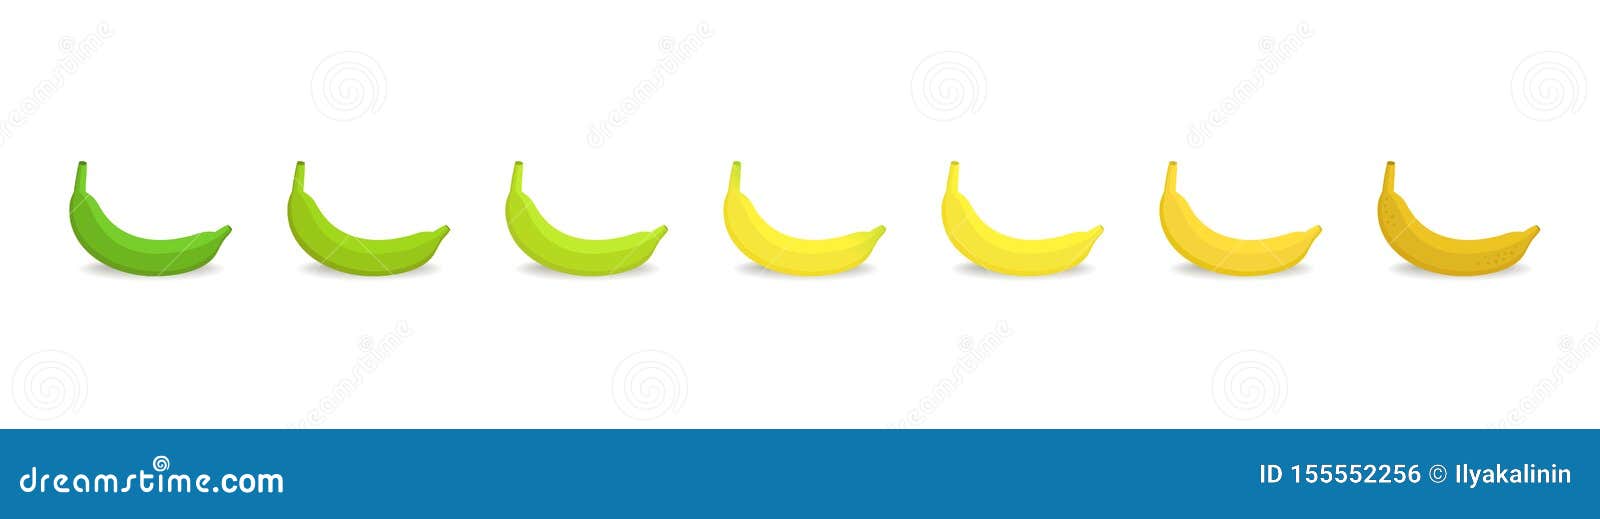 Banana Stages Chart